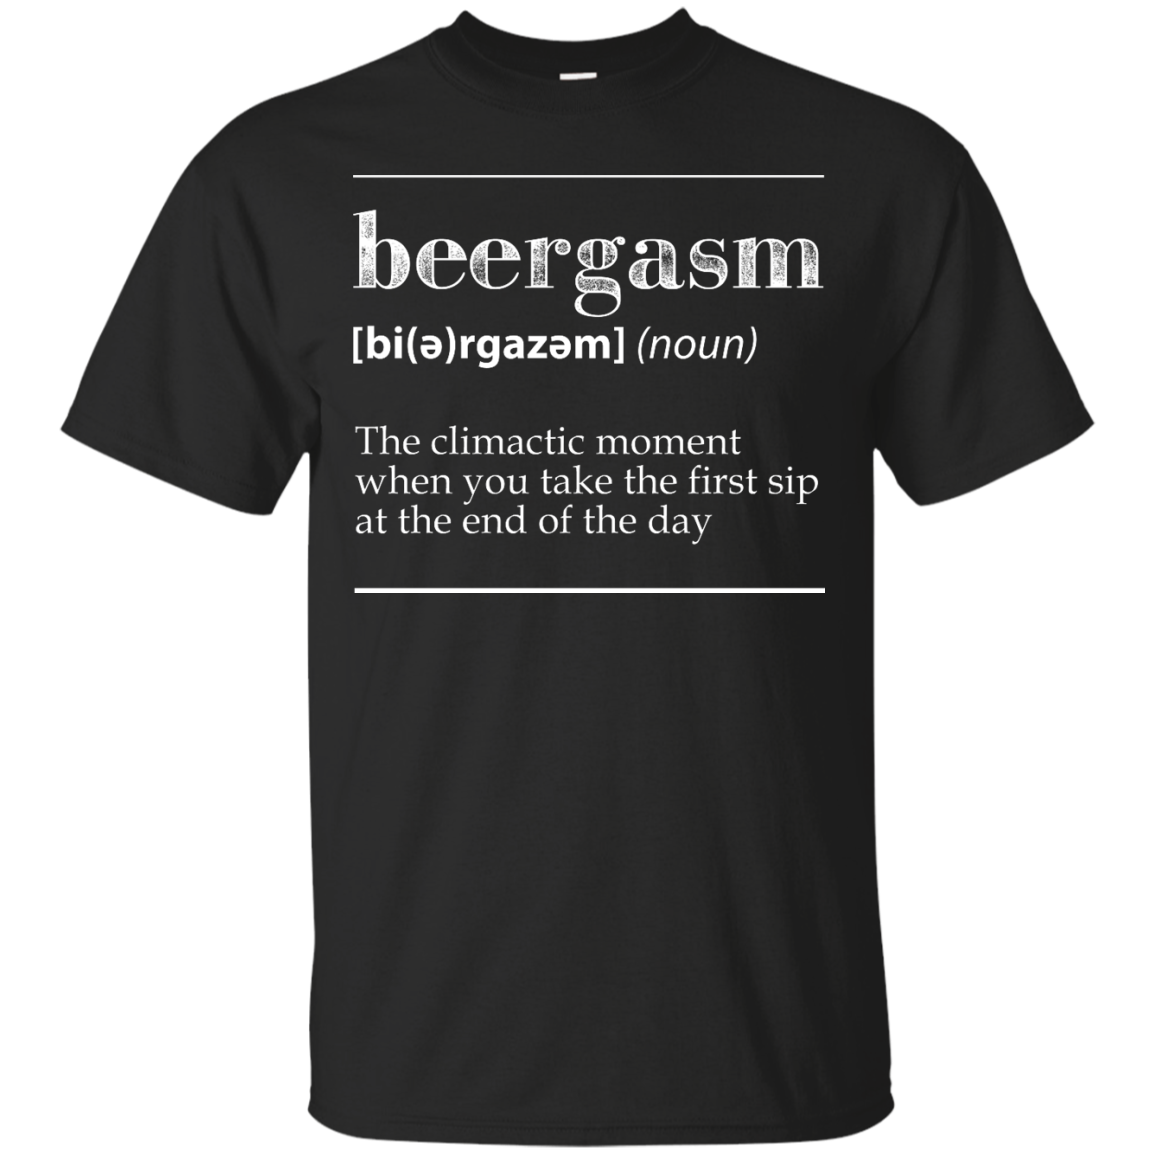 Beergasm T-Shirt Apparel - The Beer Lodge